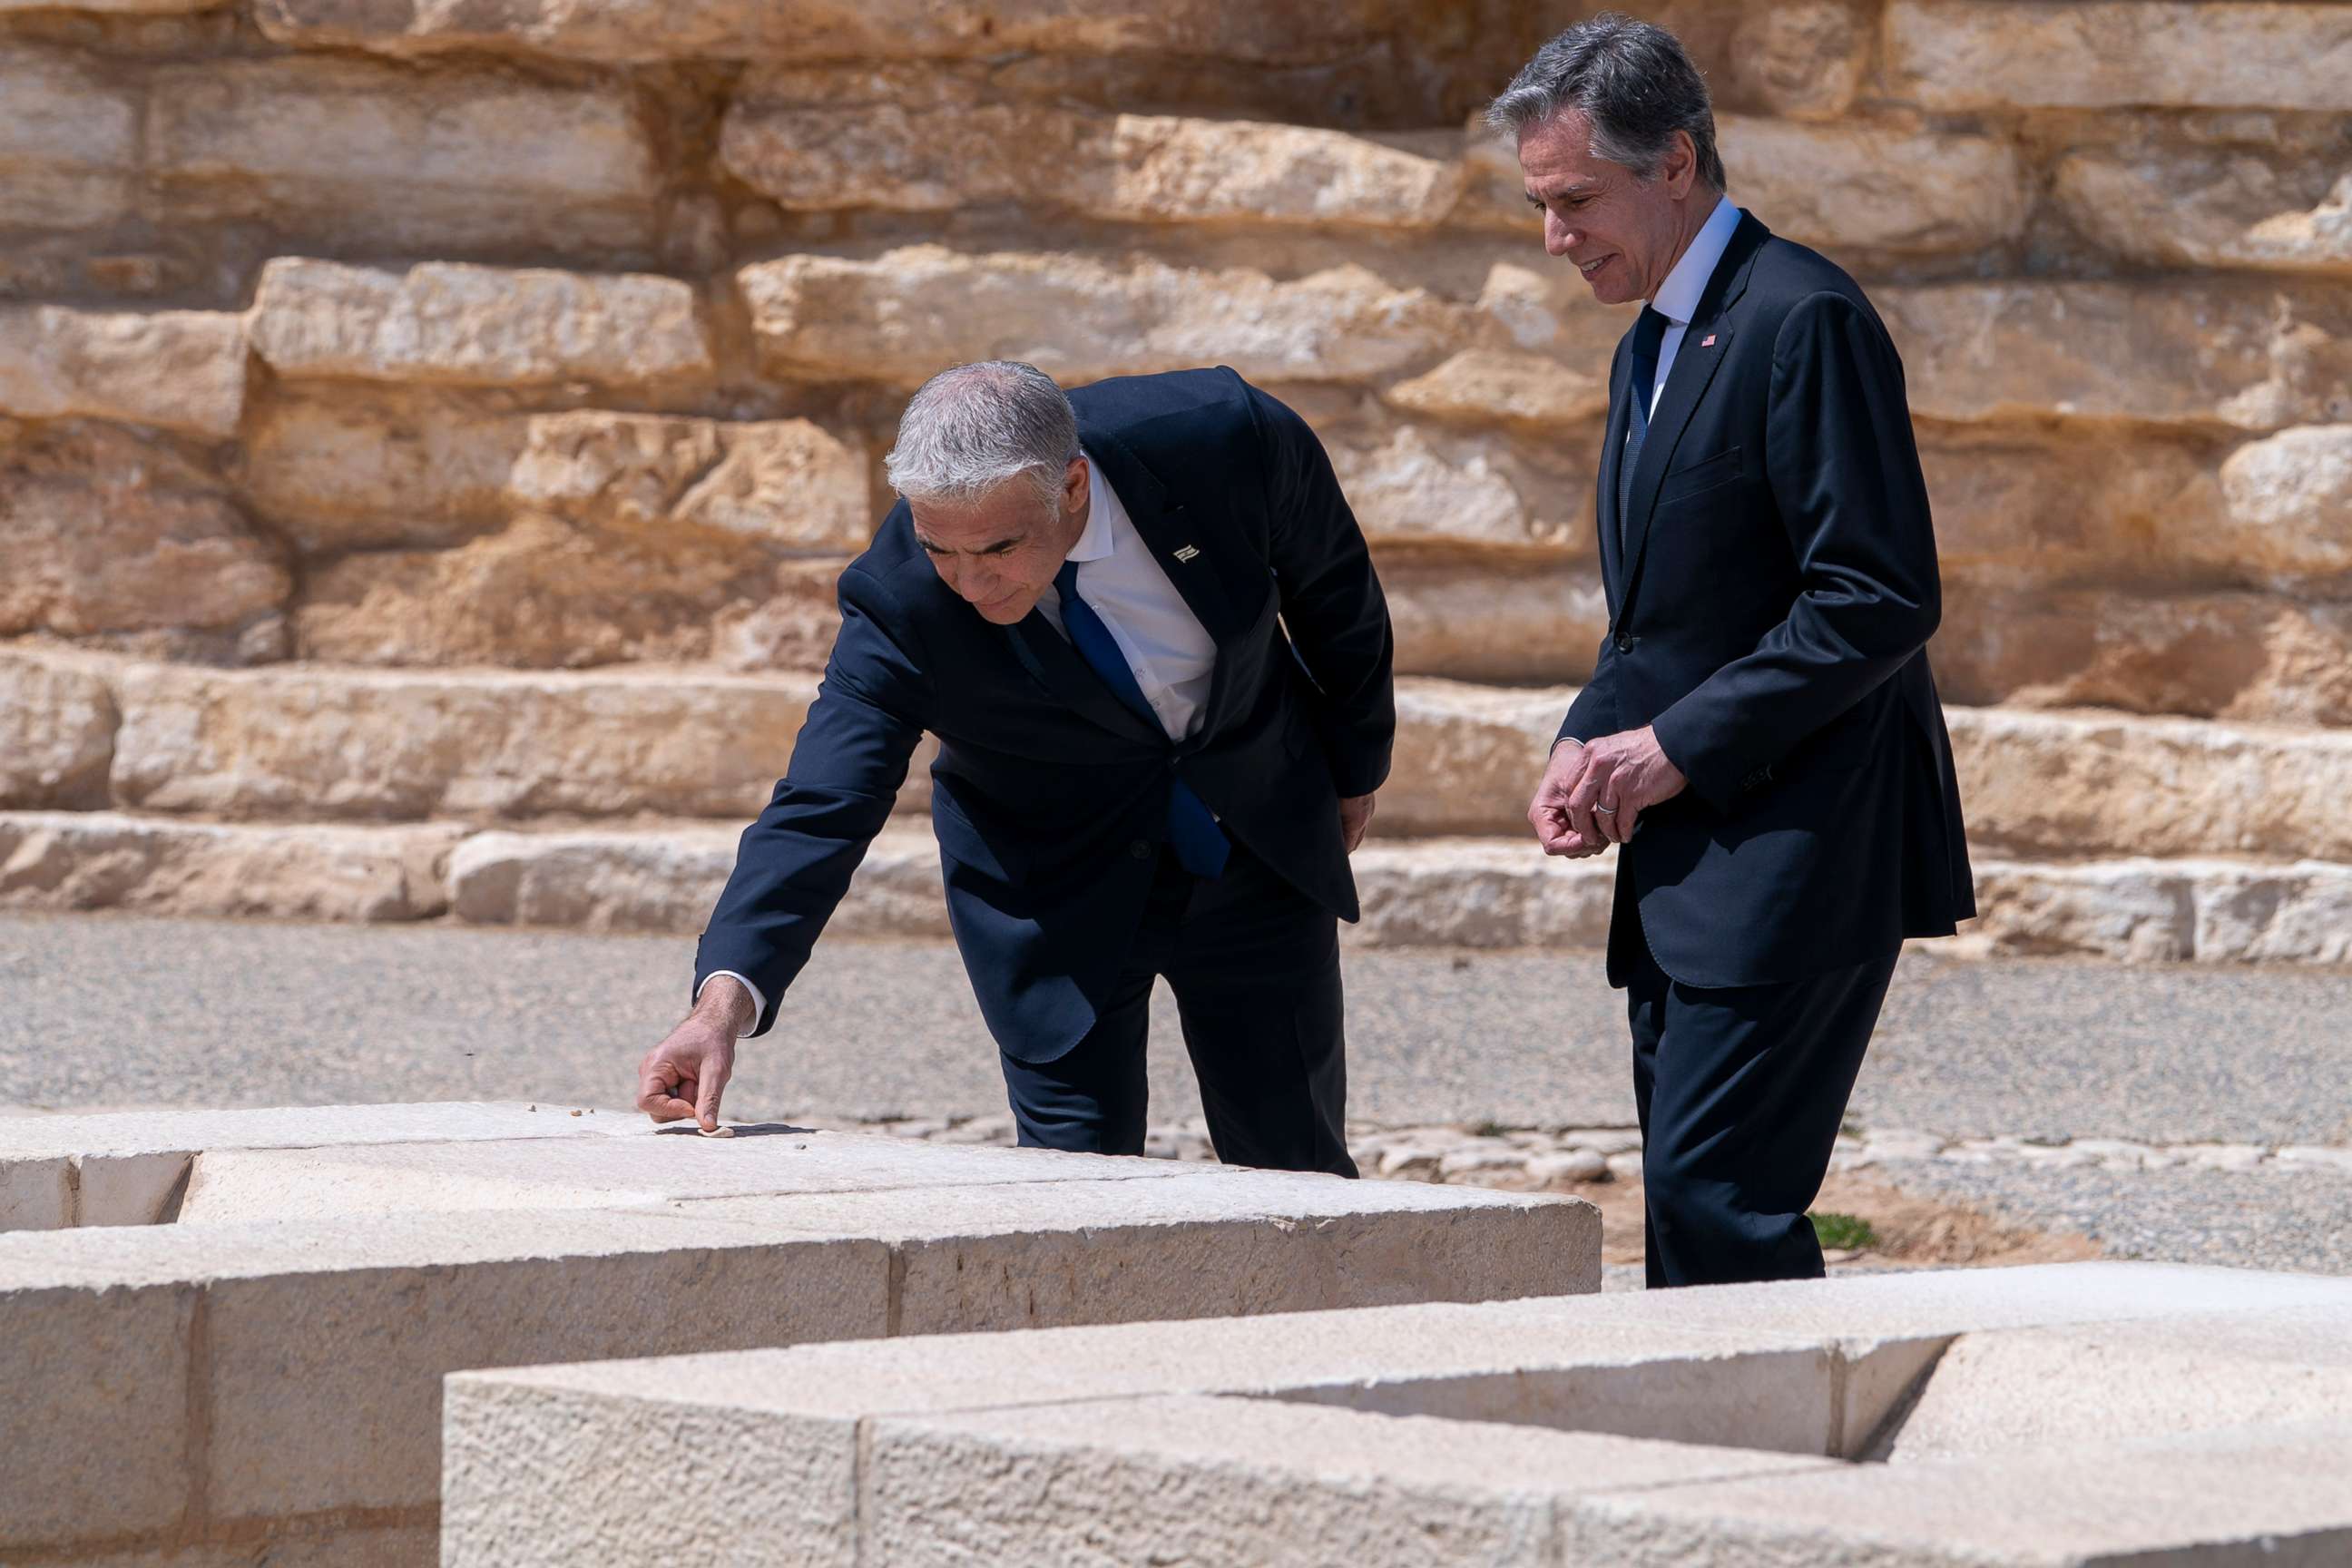 PHOTO:After meeting for the Negev Summit, Israel's Foreign Minister Yair Lapid, and U.S. Secretary of State Antony Blinken place stones on the grave of David Ben Gurion, while visiting David Ben Gurion National Park, March 28, 2022, in Sde Boker, Israel. 